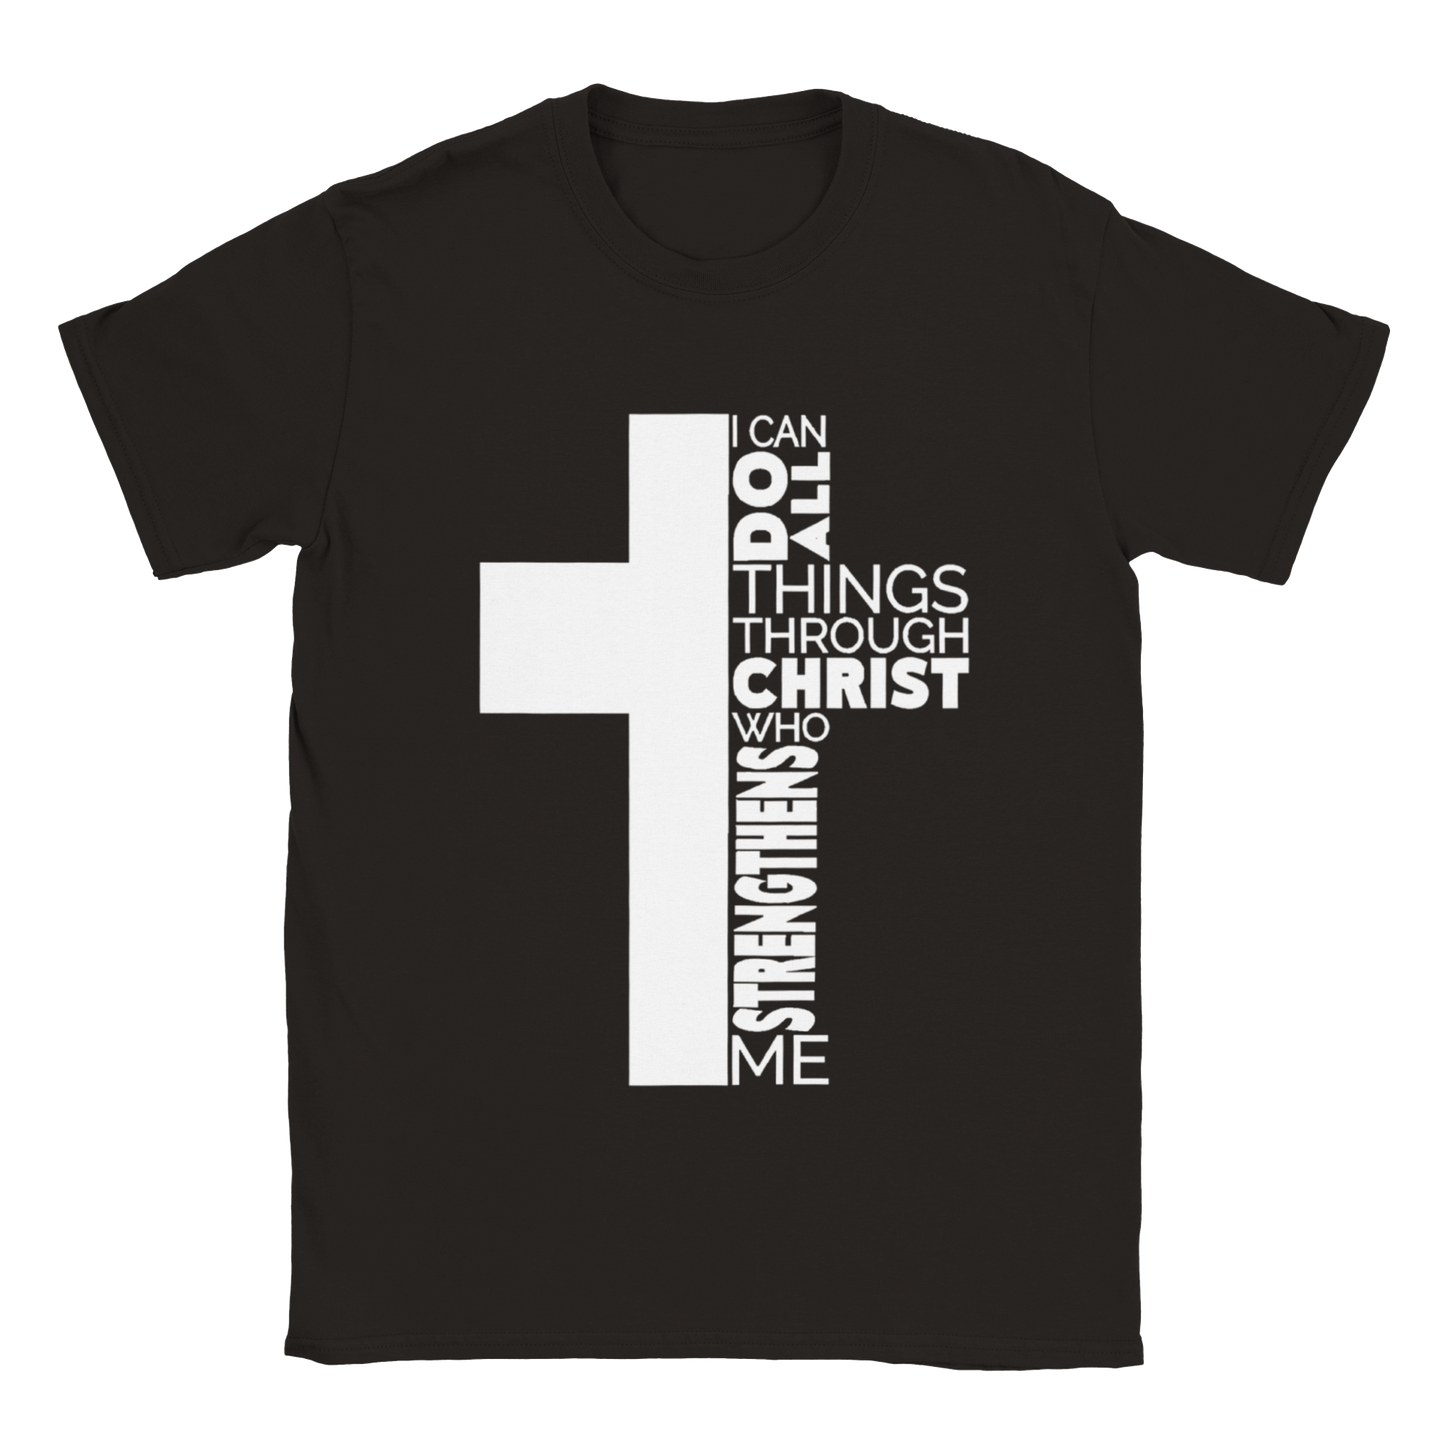 I Can Do All Things Through Christ.. T-shirt